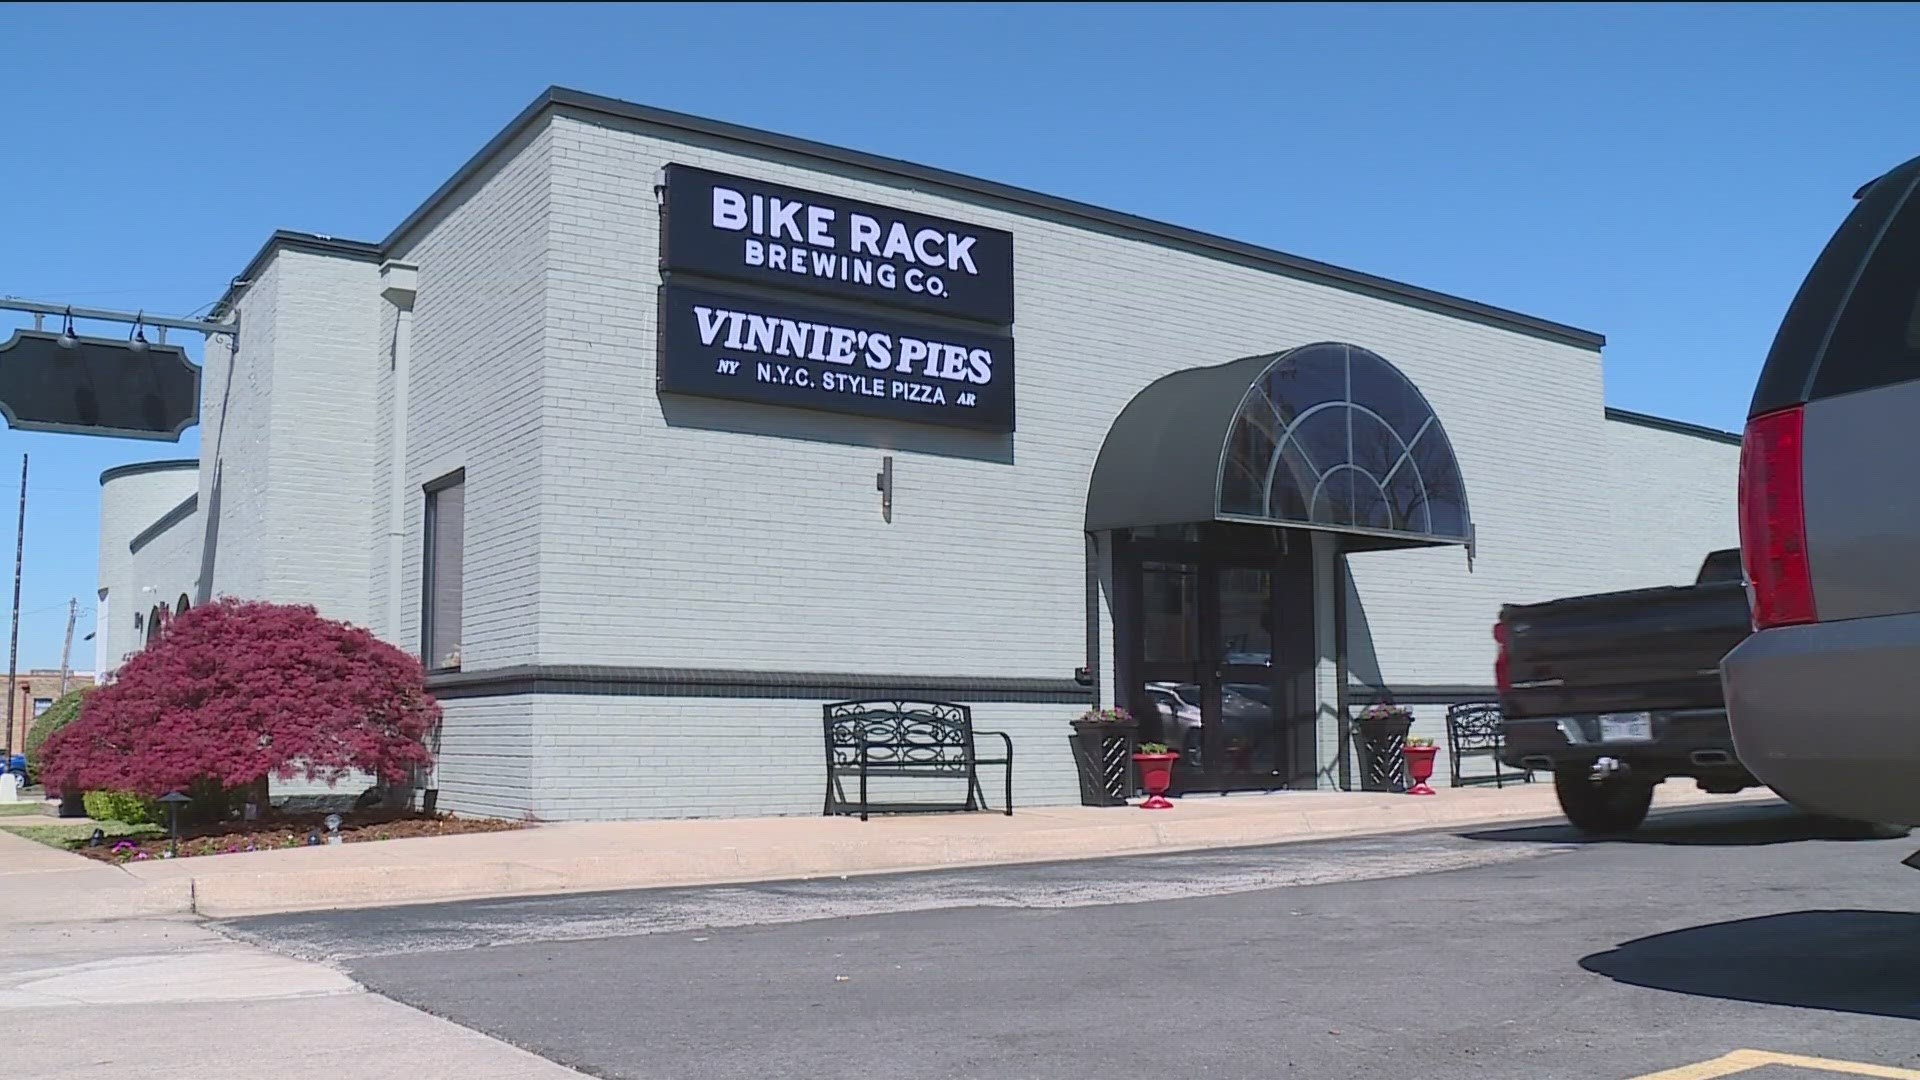 Vinnie's Pies, a Fort Smith food truck, has expanded to a restaurant in partnership with Bike Rack Brewing Company and Taliano's Italian Restaurant.